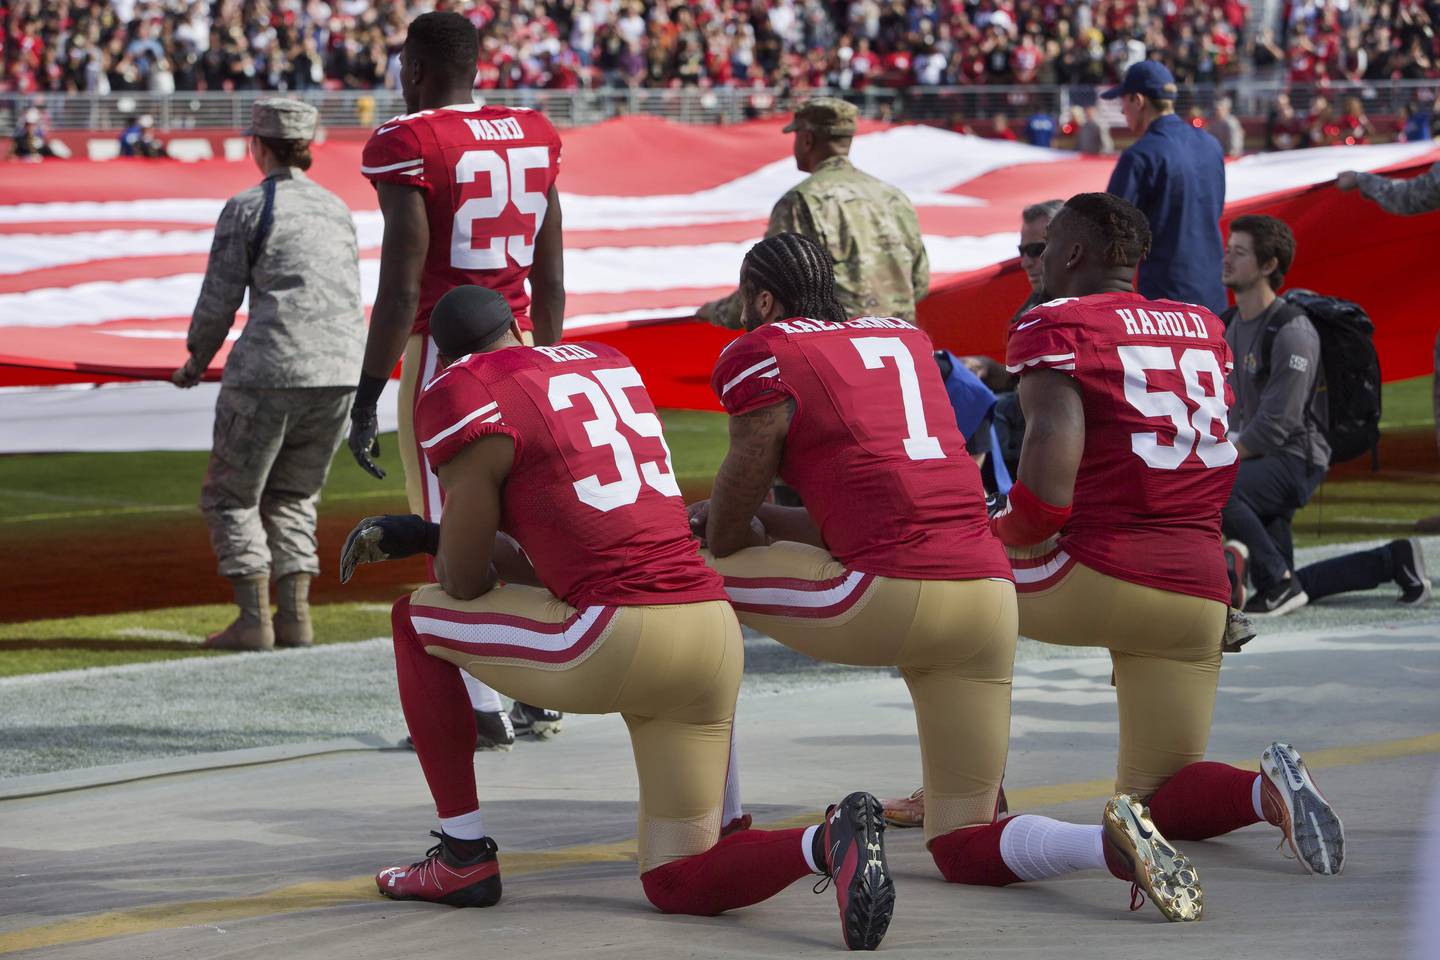 (FILES) In this file photo taken on November 6, 2016 Quarterback Colin Kaepernick #7, safety Eric Reid #35, and linebacker Eli Harold #58 of the San Francisco 49ers kneel before a game against the New Orleans Saints with the US flag unfurled in honor of the armed services  at Levi's Stadium in Santa Clara, California.
The NFL Players Association announced May 7, 2018 it has filed a grievance on behalf of Eric Reid, who lodged a collusion lawsuit against the league over being unsigned for kneeling during the US national anthem. Reid, a 26-year-old free agent safety who played from 2013 through last season with the San Francisco 49ers, was the first teammate to join former NFL quarterback Colin Kaepernick in a kneeling protest over social injustice and racial inequality issues. Kaepernick was unemployed during the 2017 NFL season after igniting the social protest among players that led US President Donald Trump to condemn the protests and urge owners fire players who kneeled during "The Star-Spangled Banner."
 / AFP PHOTO / GETTY IMAGES NORTH AMERICA / BRIAN BAHR